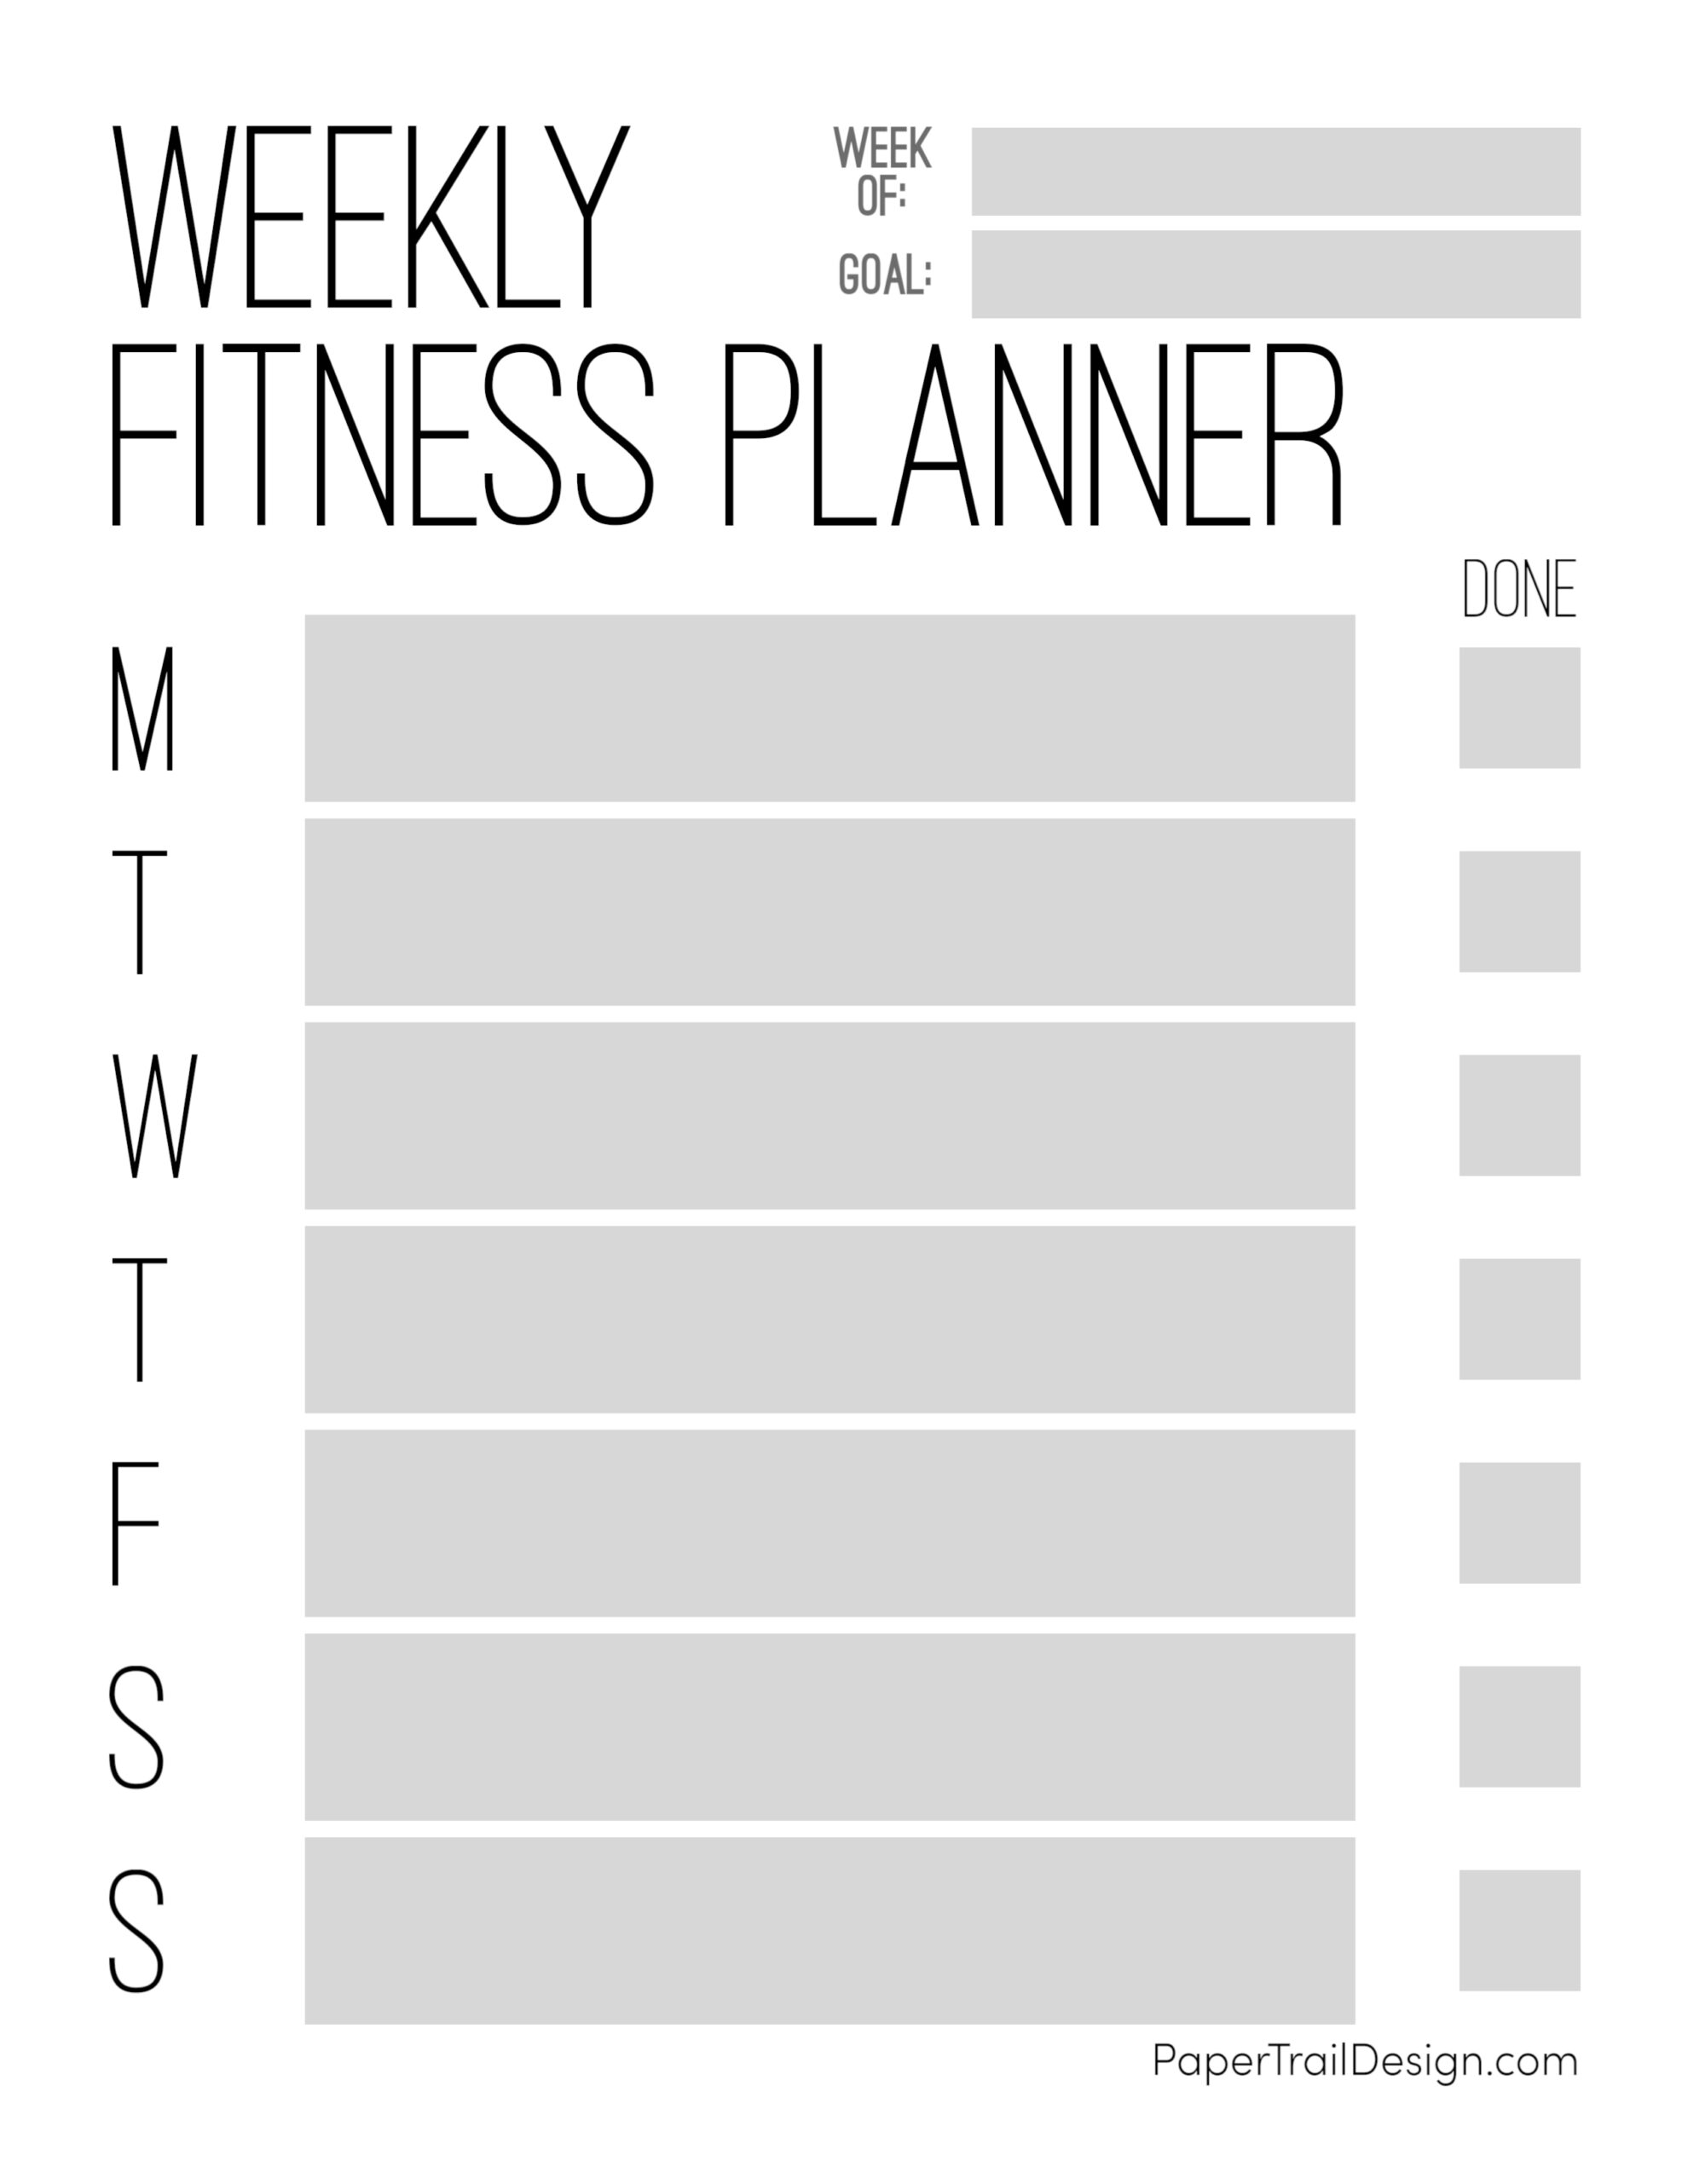 pocket-planner-inserts-printable-download-weekly-fitness-schedule